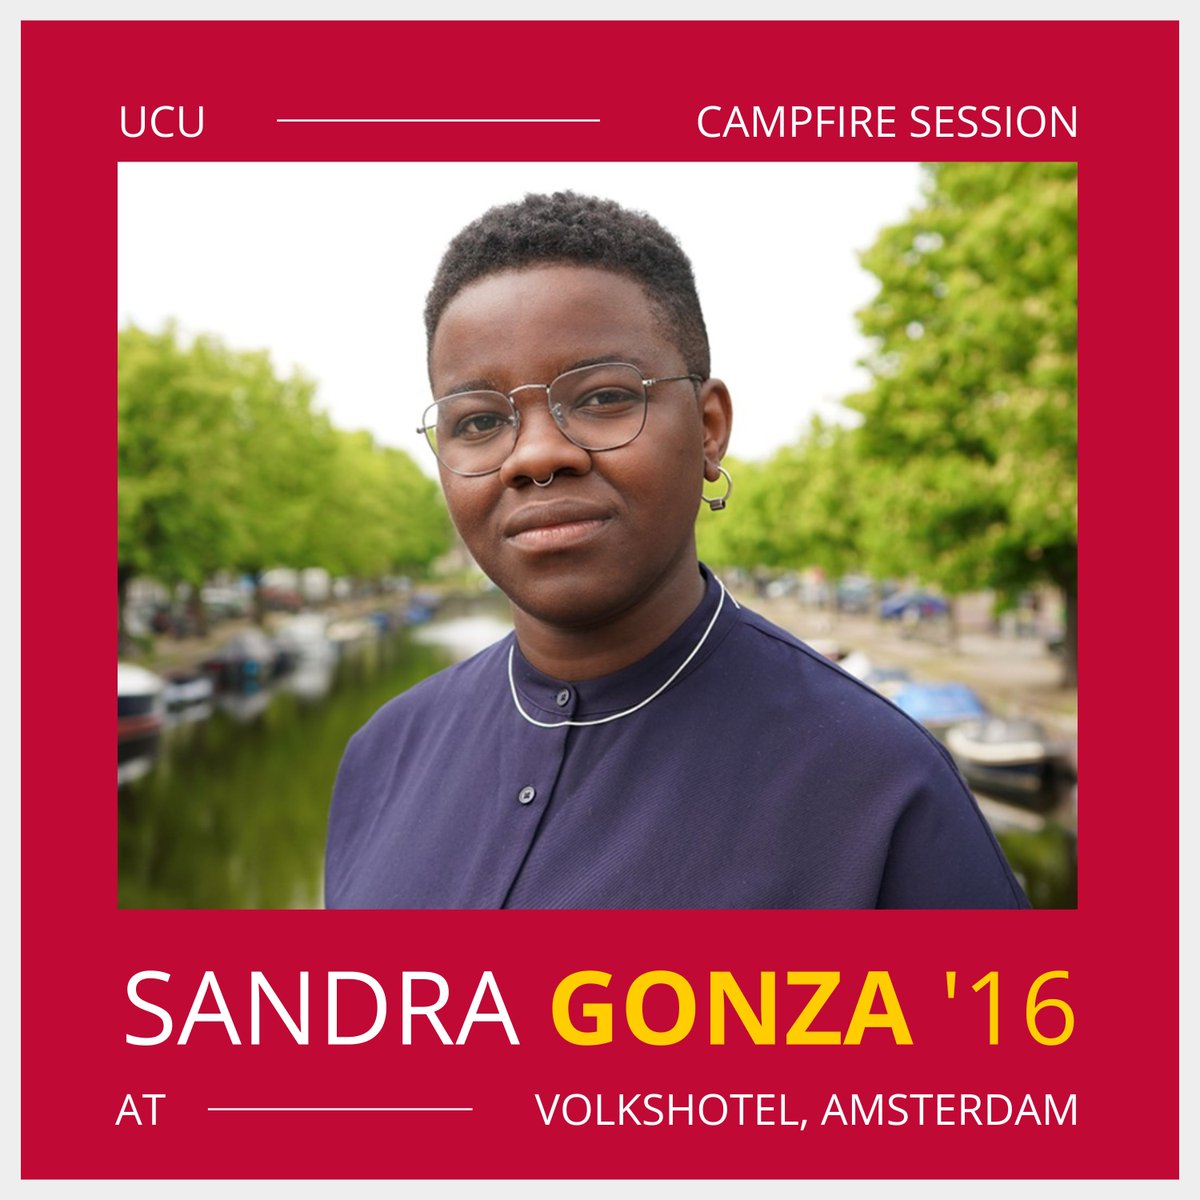 Our Alumni Office invites current and former University College Utrecht students to our second Campfire Session on Thursday 10 November 2022 with alumna Sandra Gonza. More information on our website: uu.nl/en/events/ucu-…